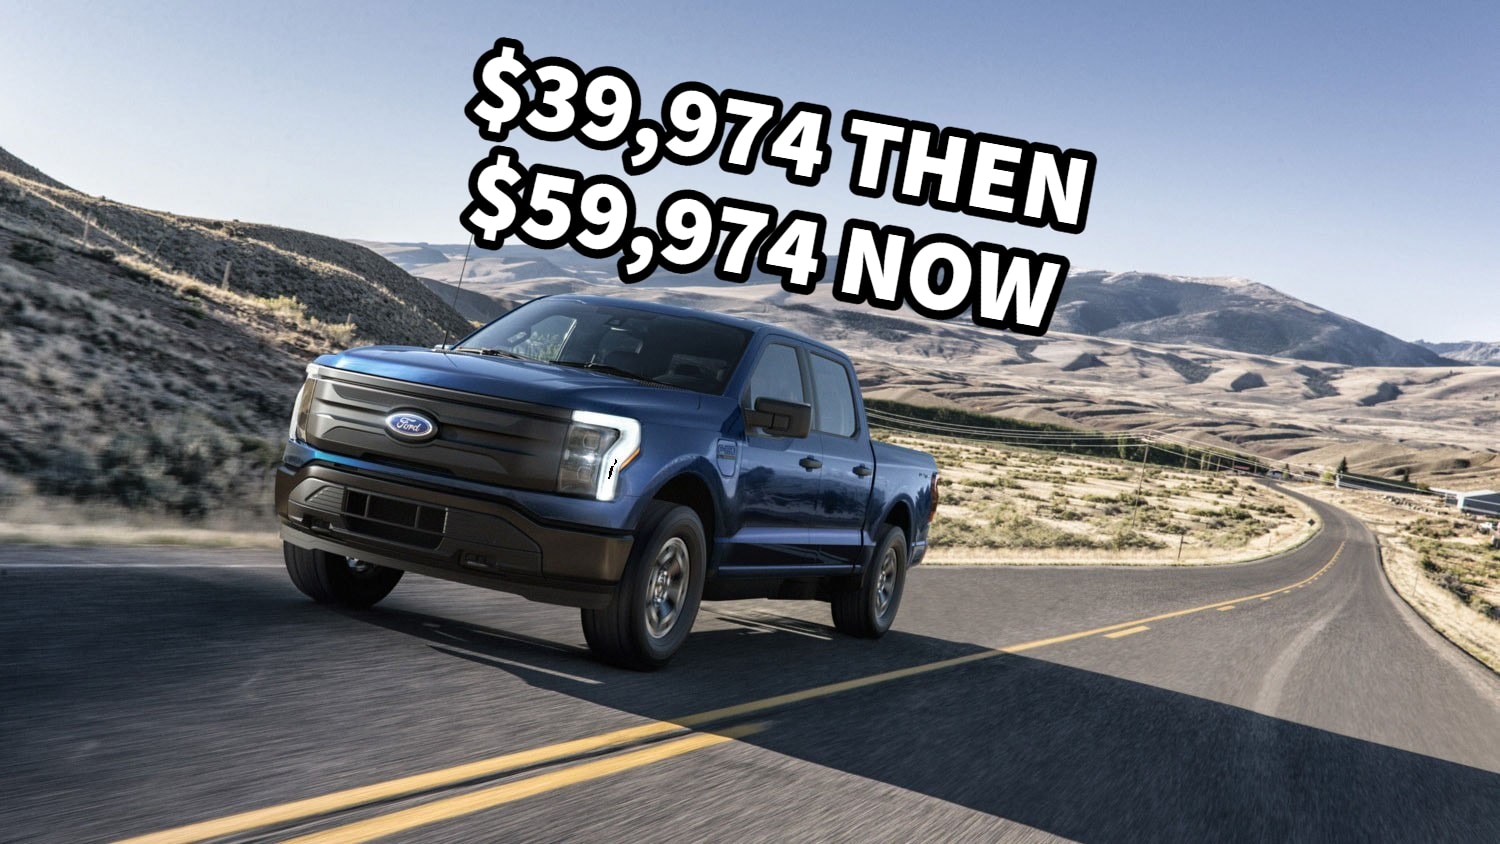 Ford F-150 Lightning Pro's Starting Price Has Increased by $20K Since ...